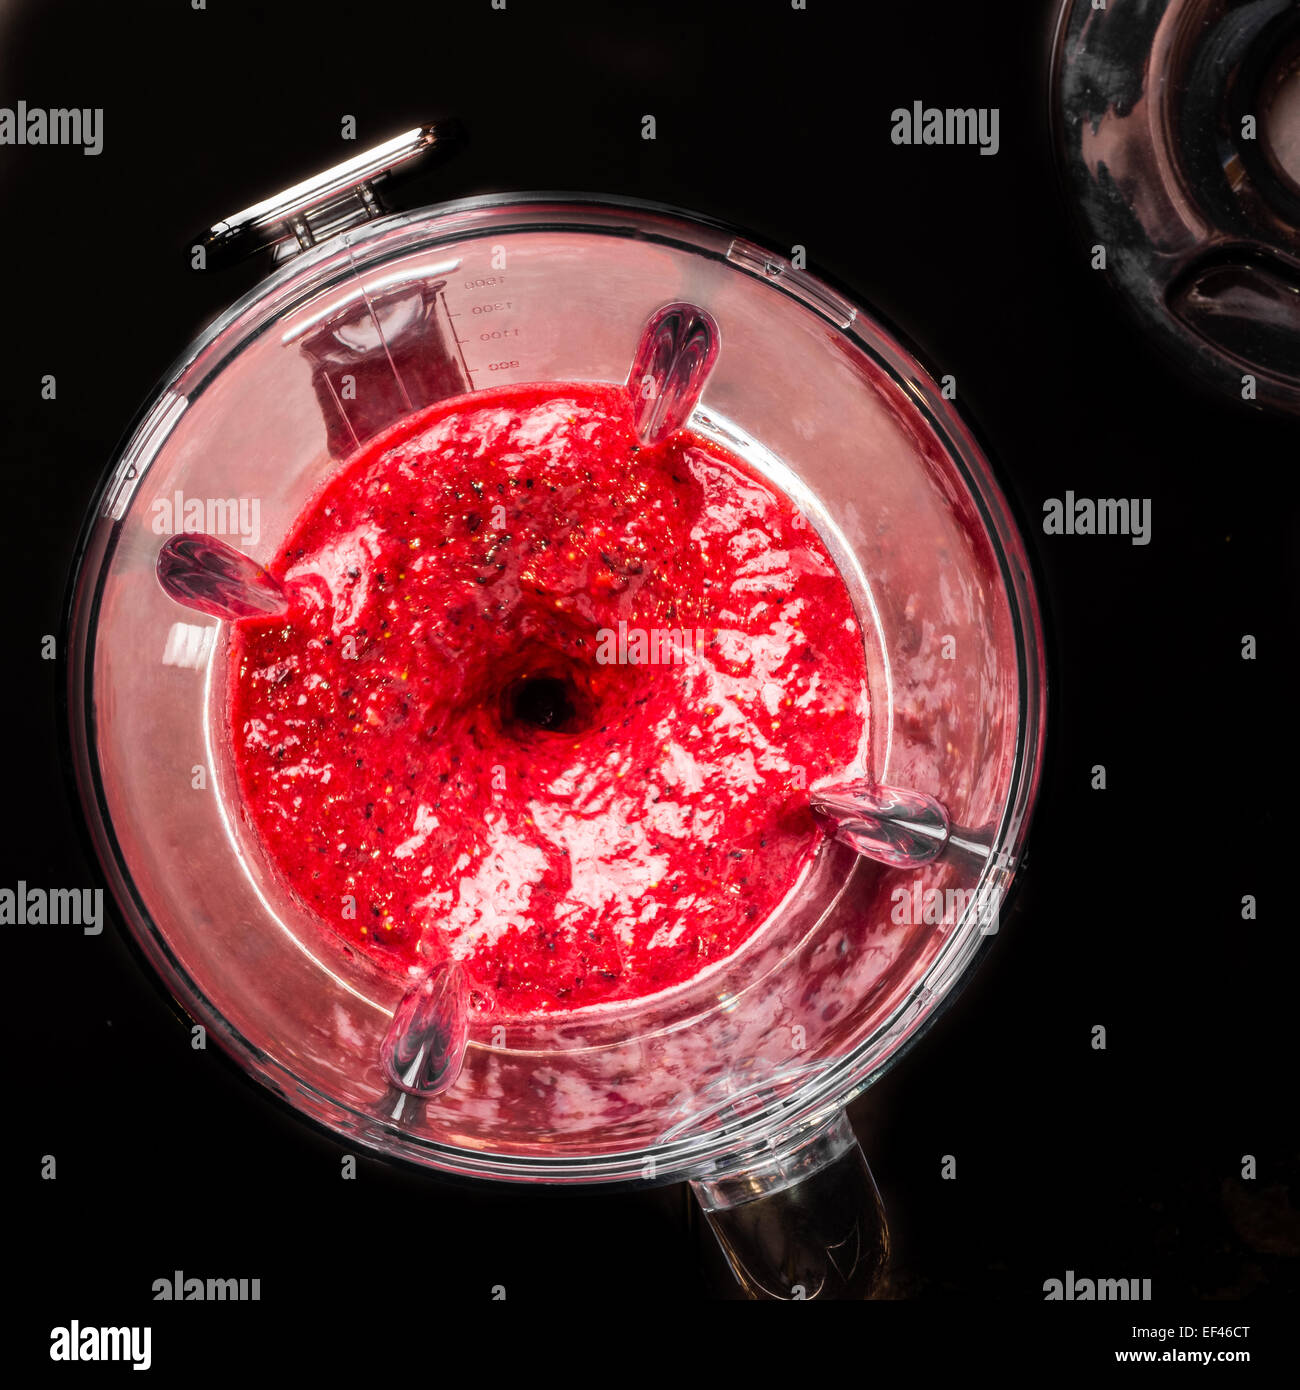 Mixed berries in a blender viewed from the top as they are being liquidized. Stock Photo